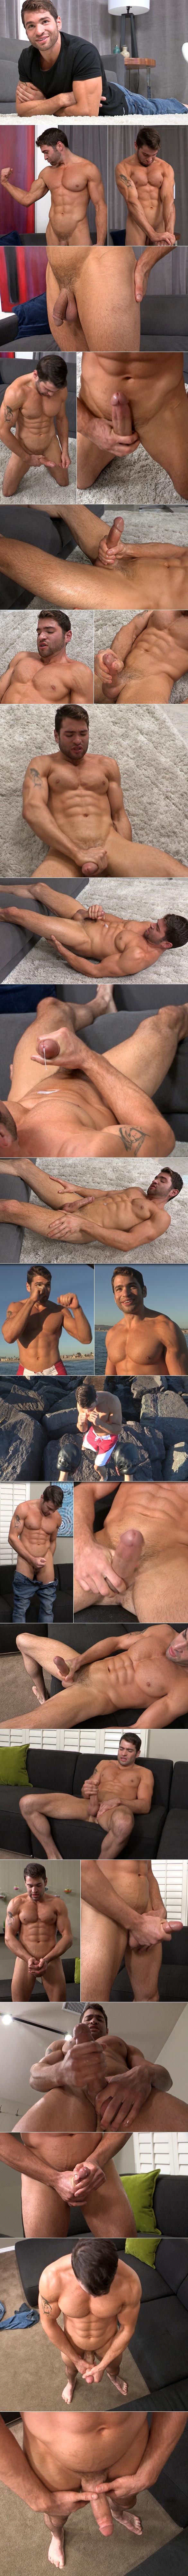 Sean Cody: Muscle stud Harris rubs one out